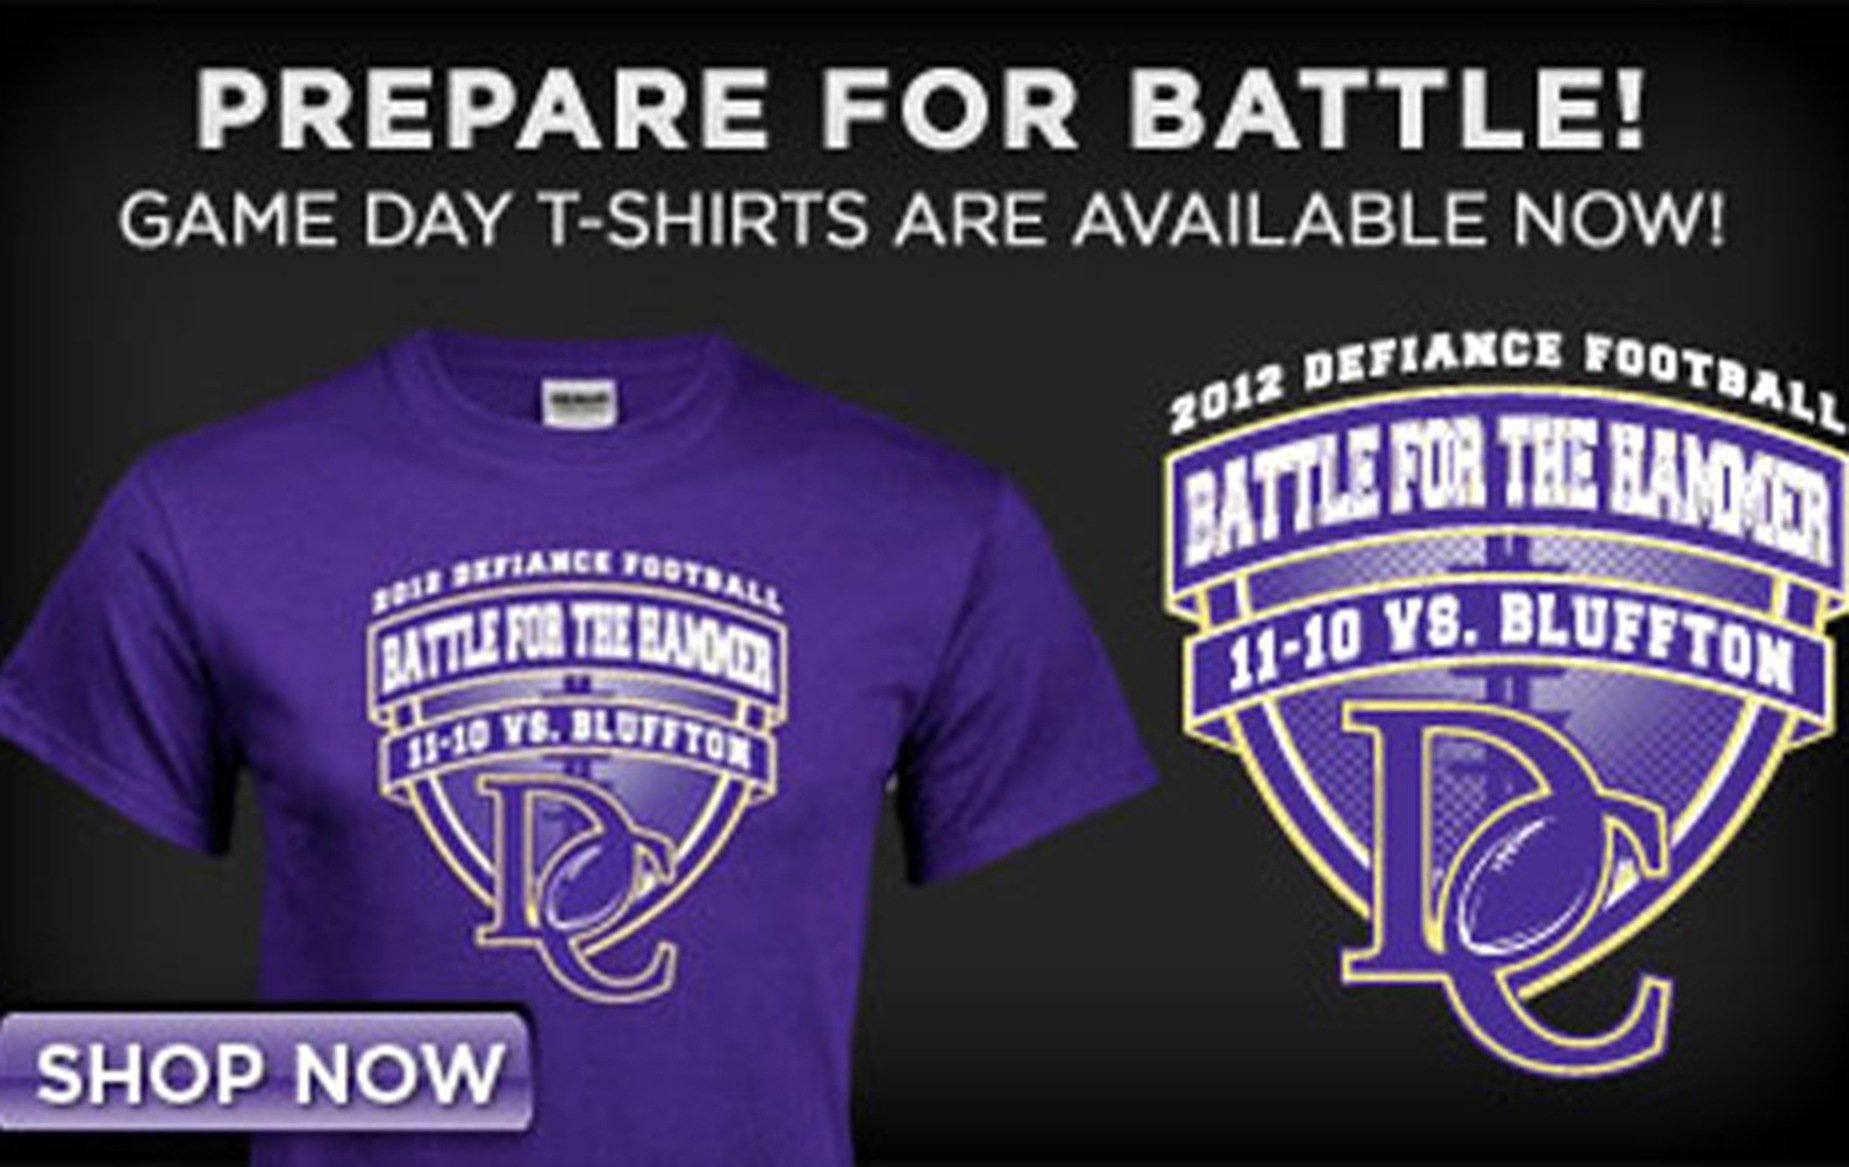 Order Your DC vs Bluffton T-Shirts Today!